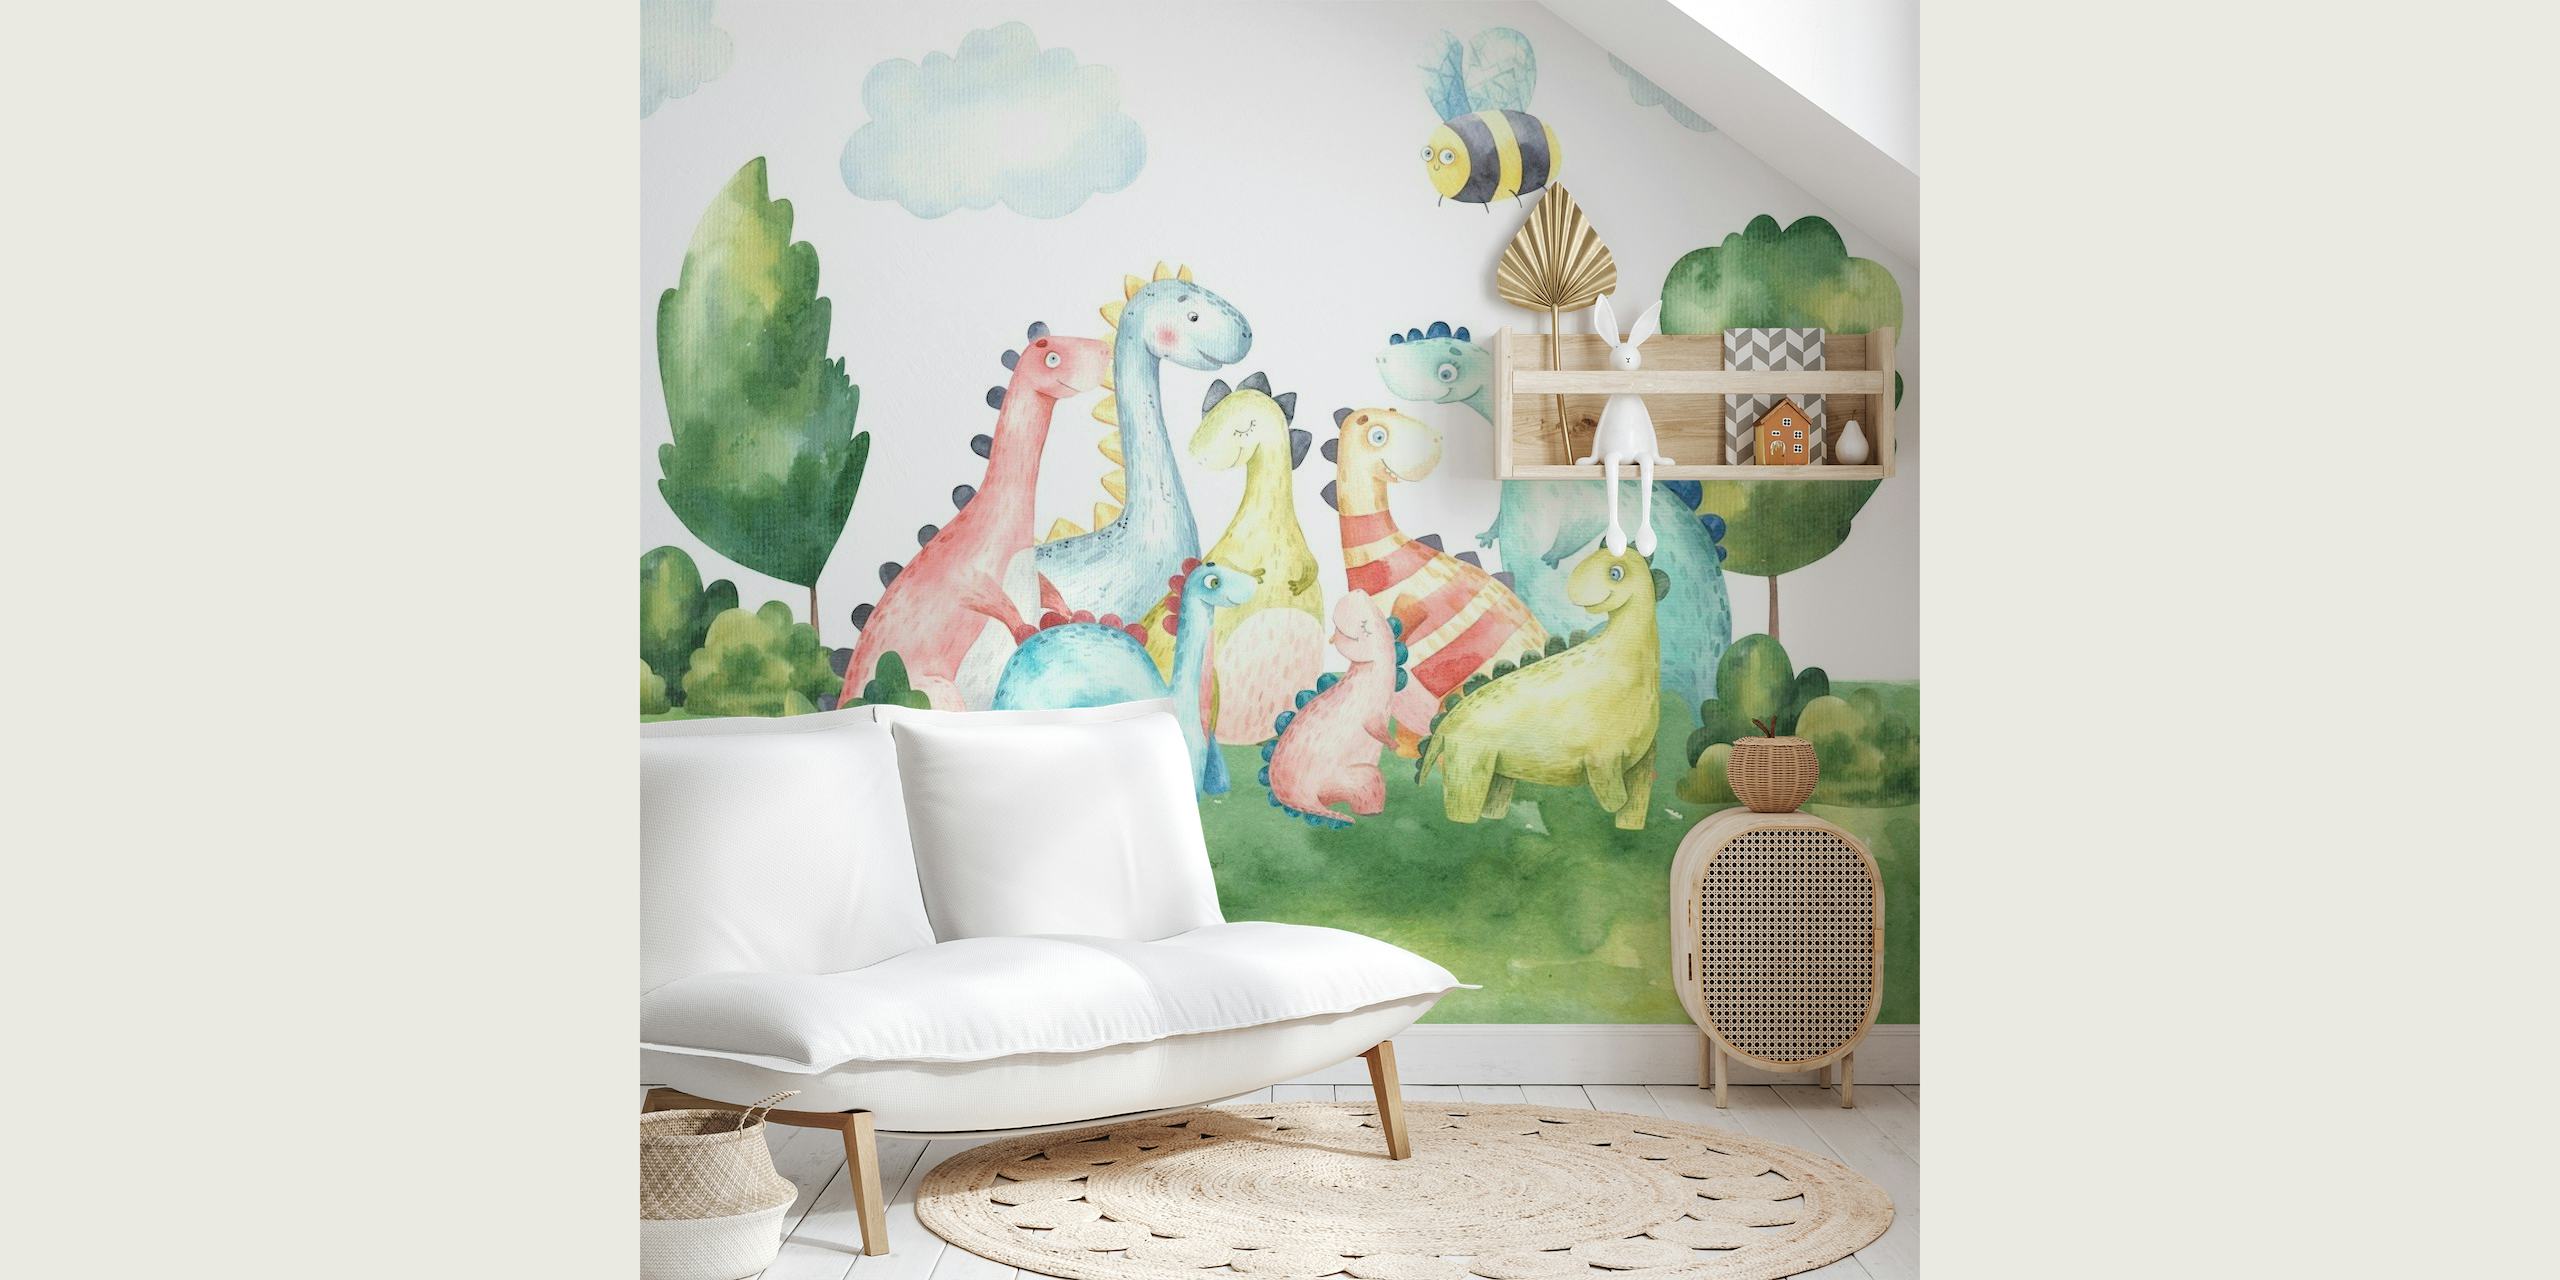 Watercolor wall mural of a dinosaur family in a pastel landscape